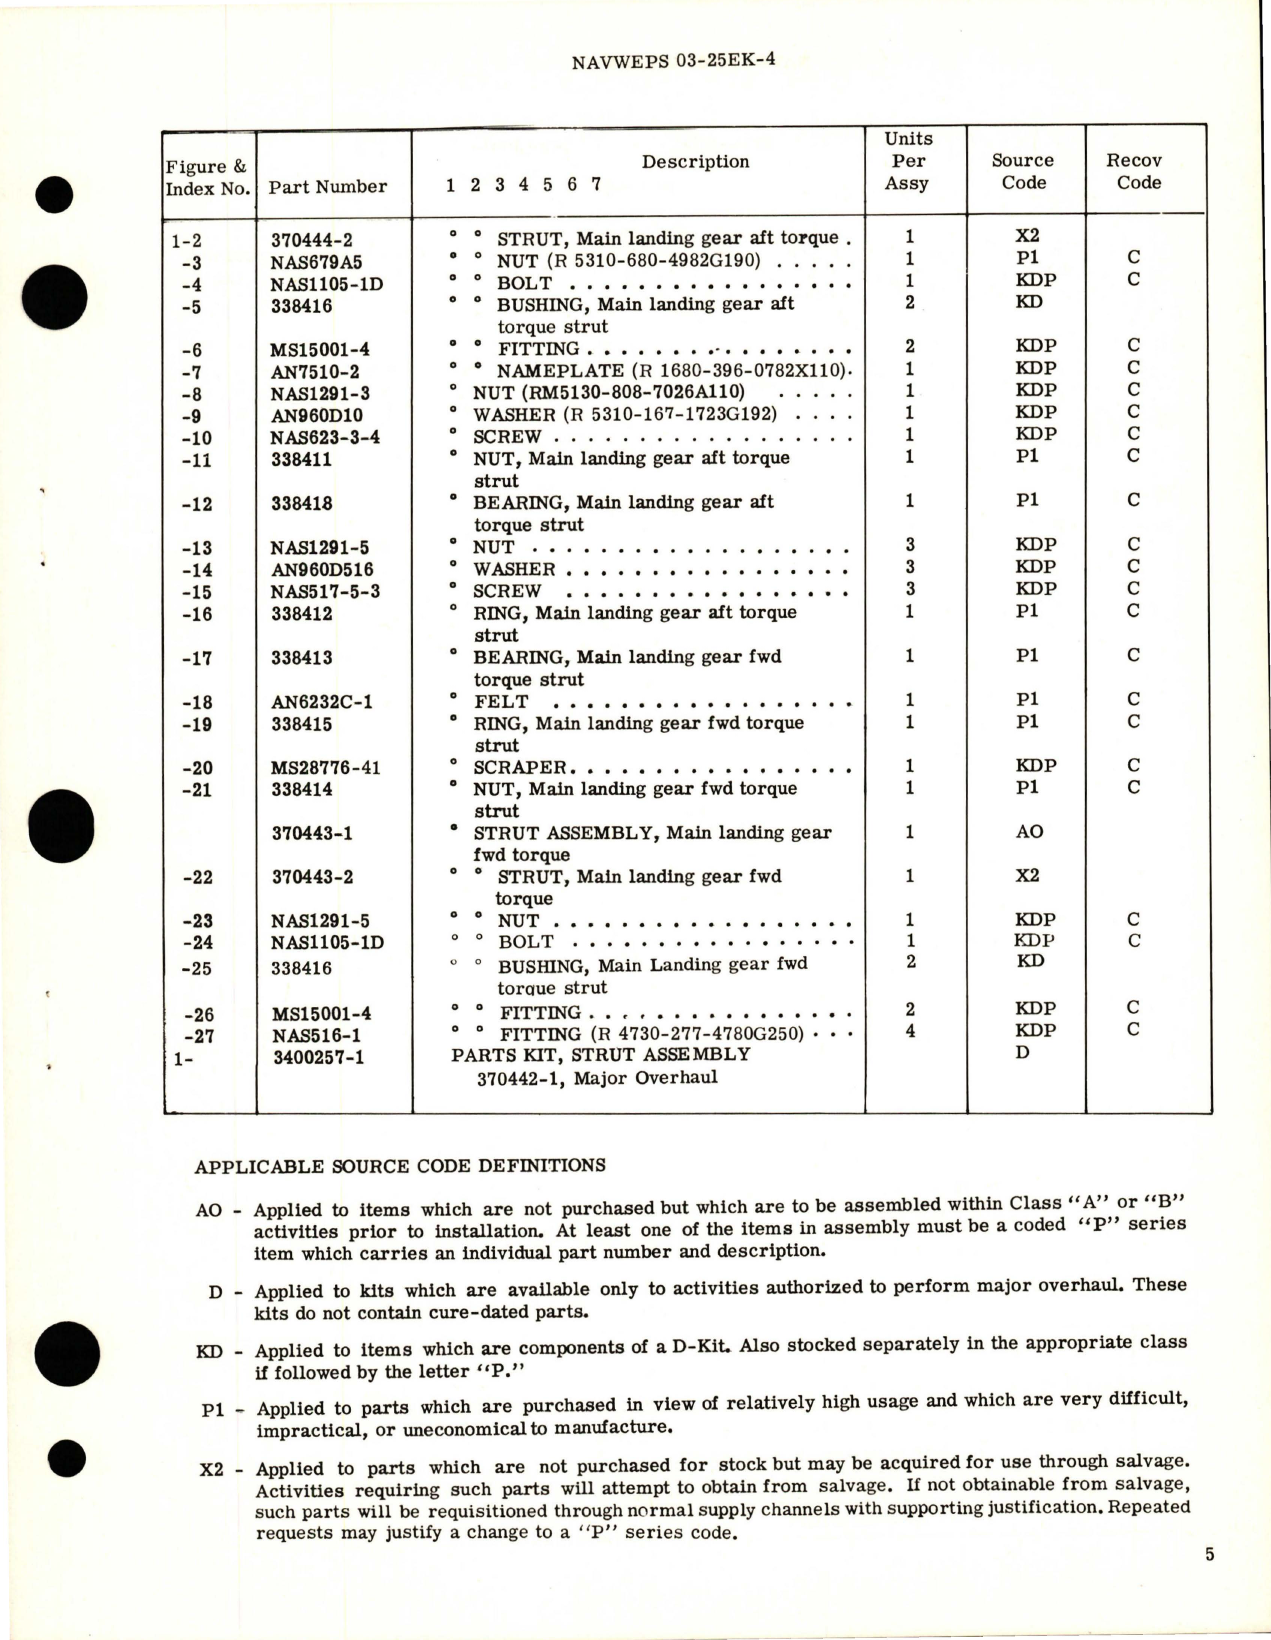 Sample page 5 from AirCorps Library document: Overhaul Instructions with Illustrated Parts Breakdown for Main Landing Gear Torque Strut Assembly - Part 370442-1